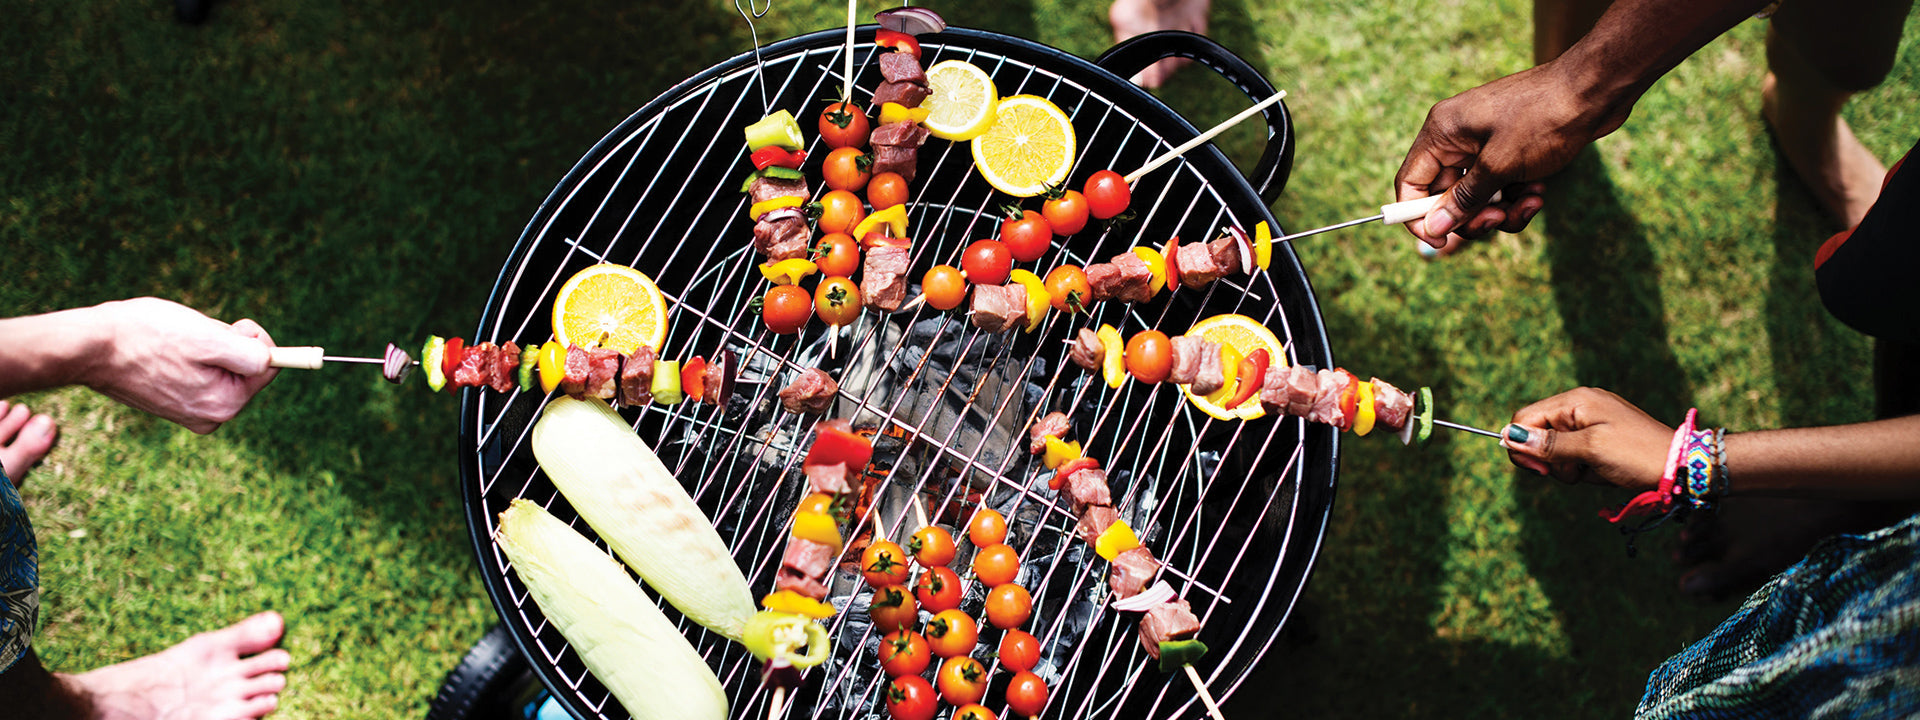 How Healthy is Barbequed Food?